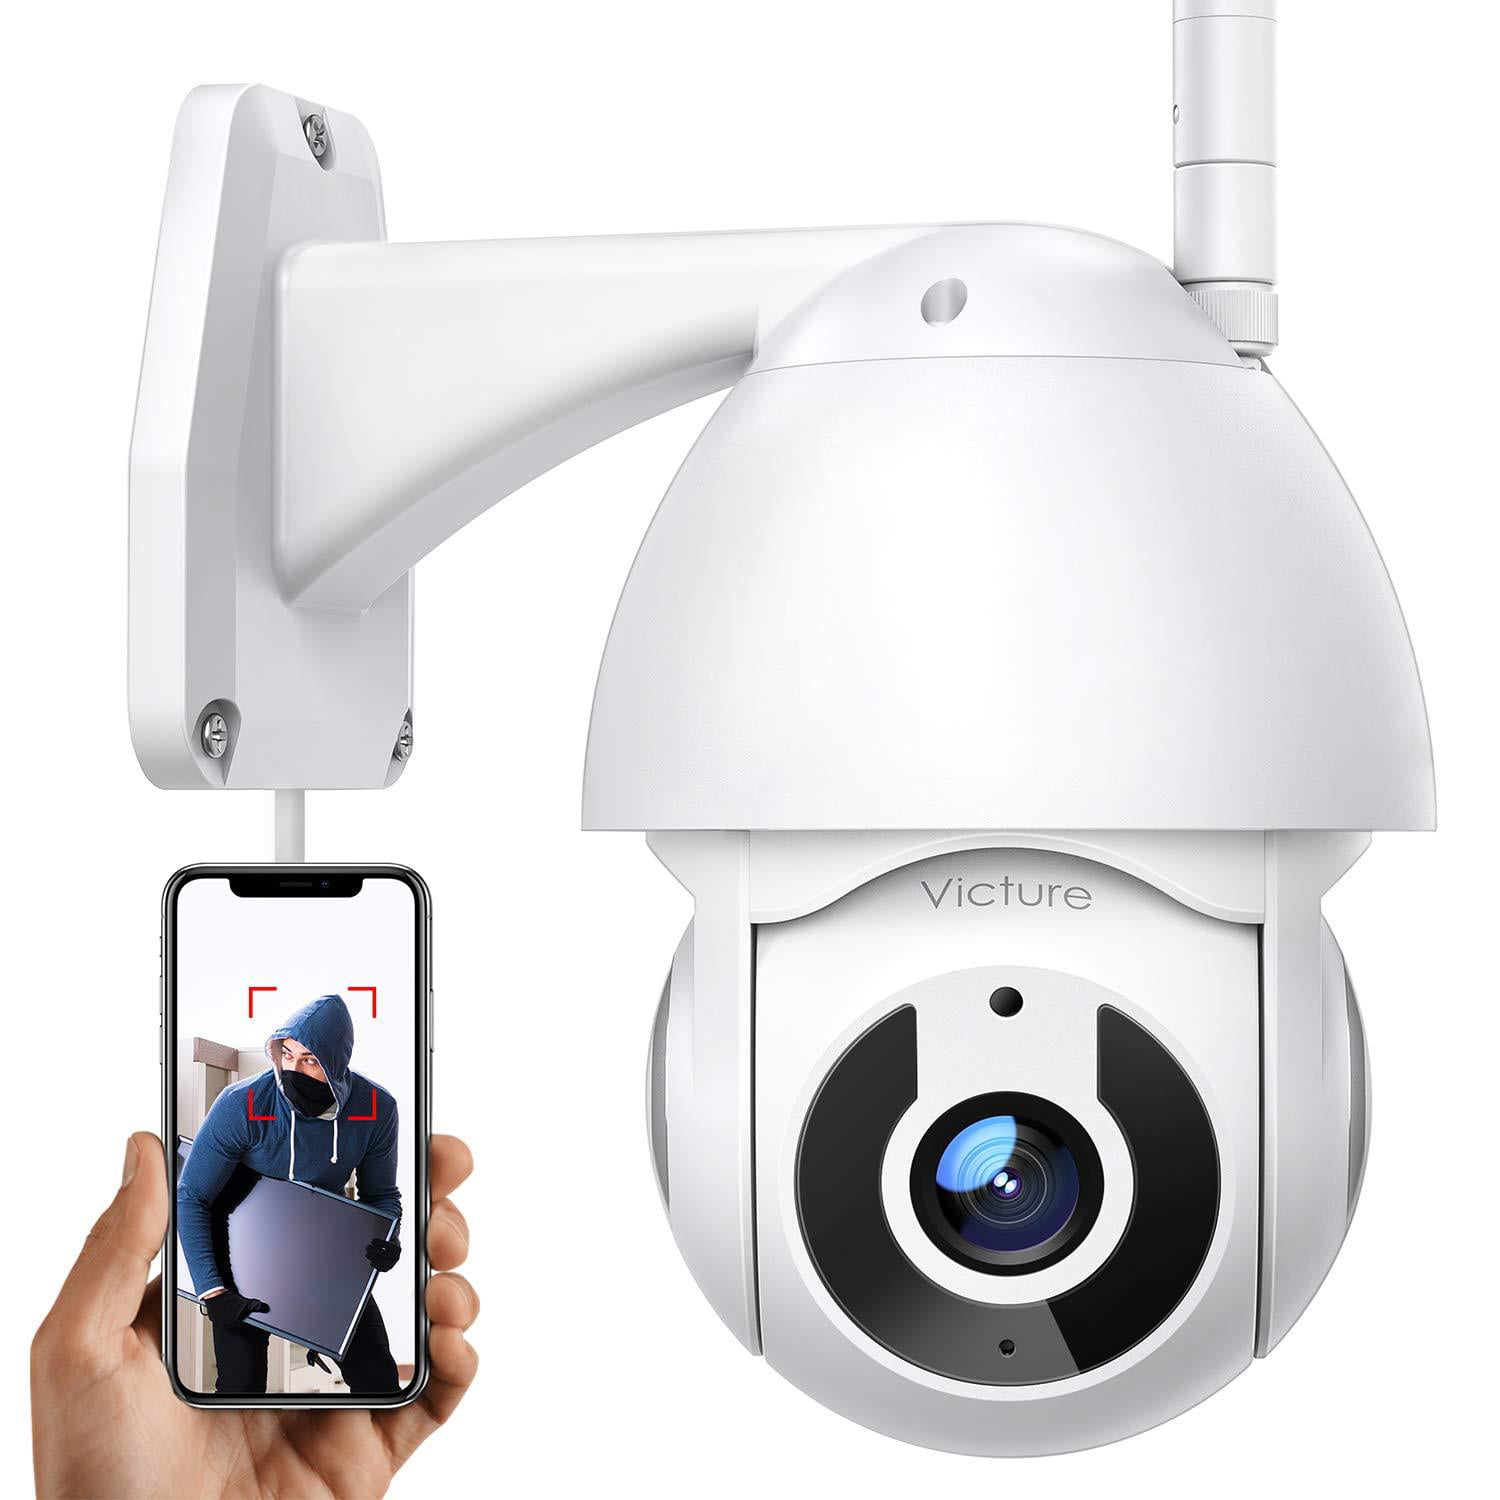 Security Camera Outdoor, Victure 1080P WiFi Home Security 